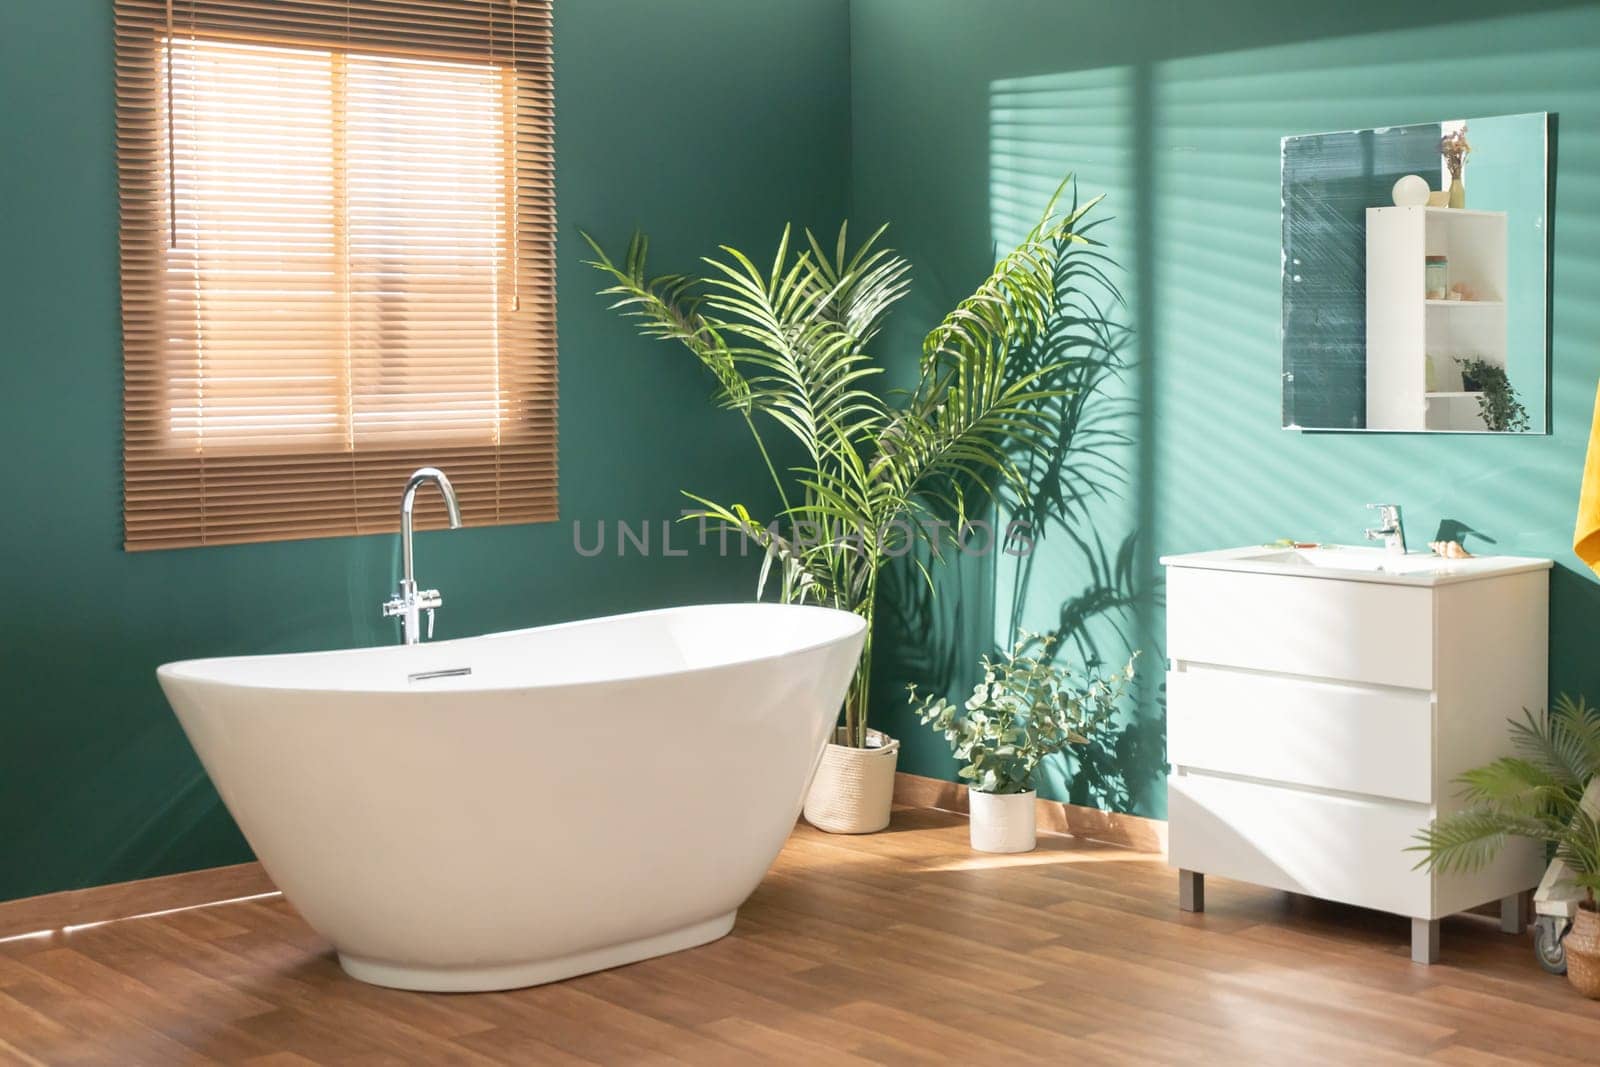 Modern bright bathroom with green walls, wooden floor, plant and window by PaulCarr